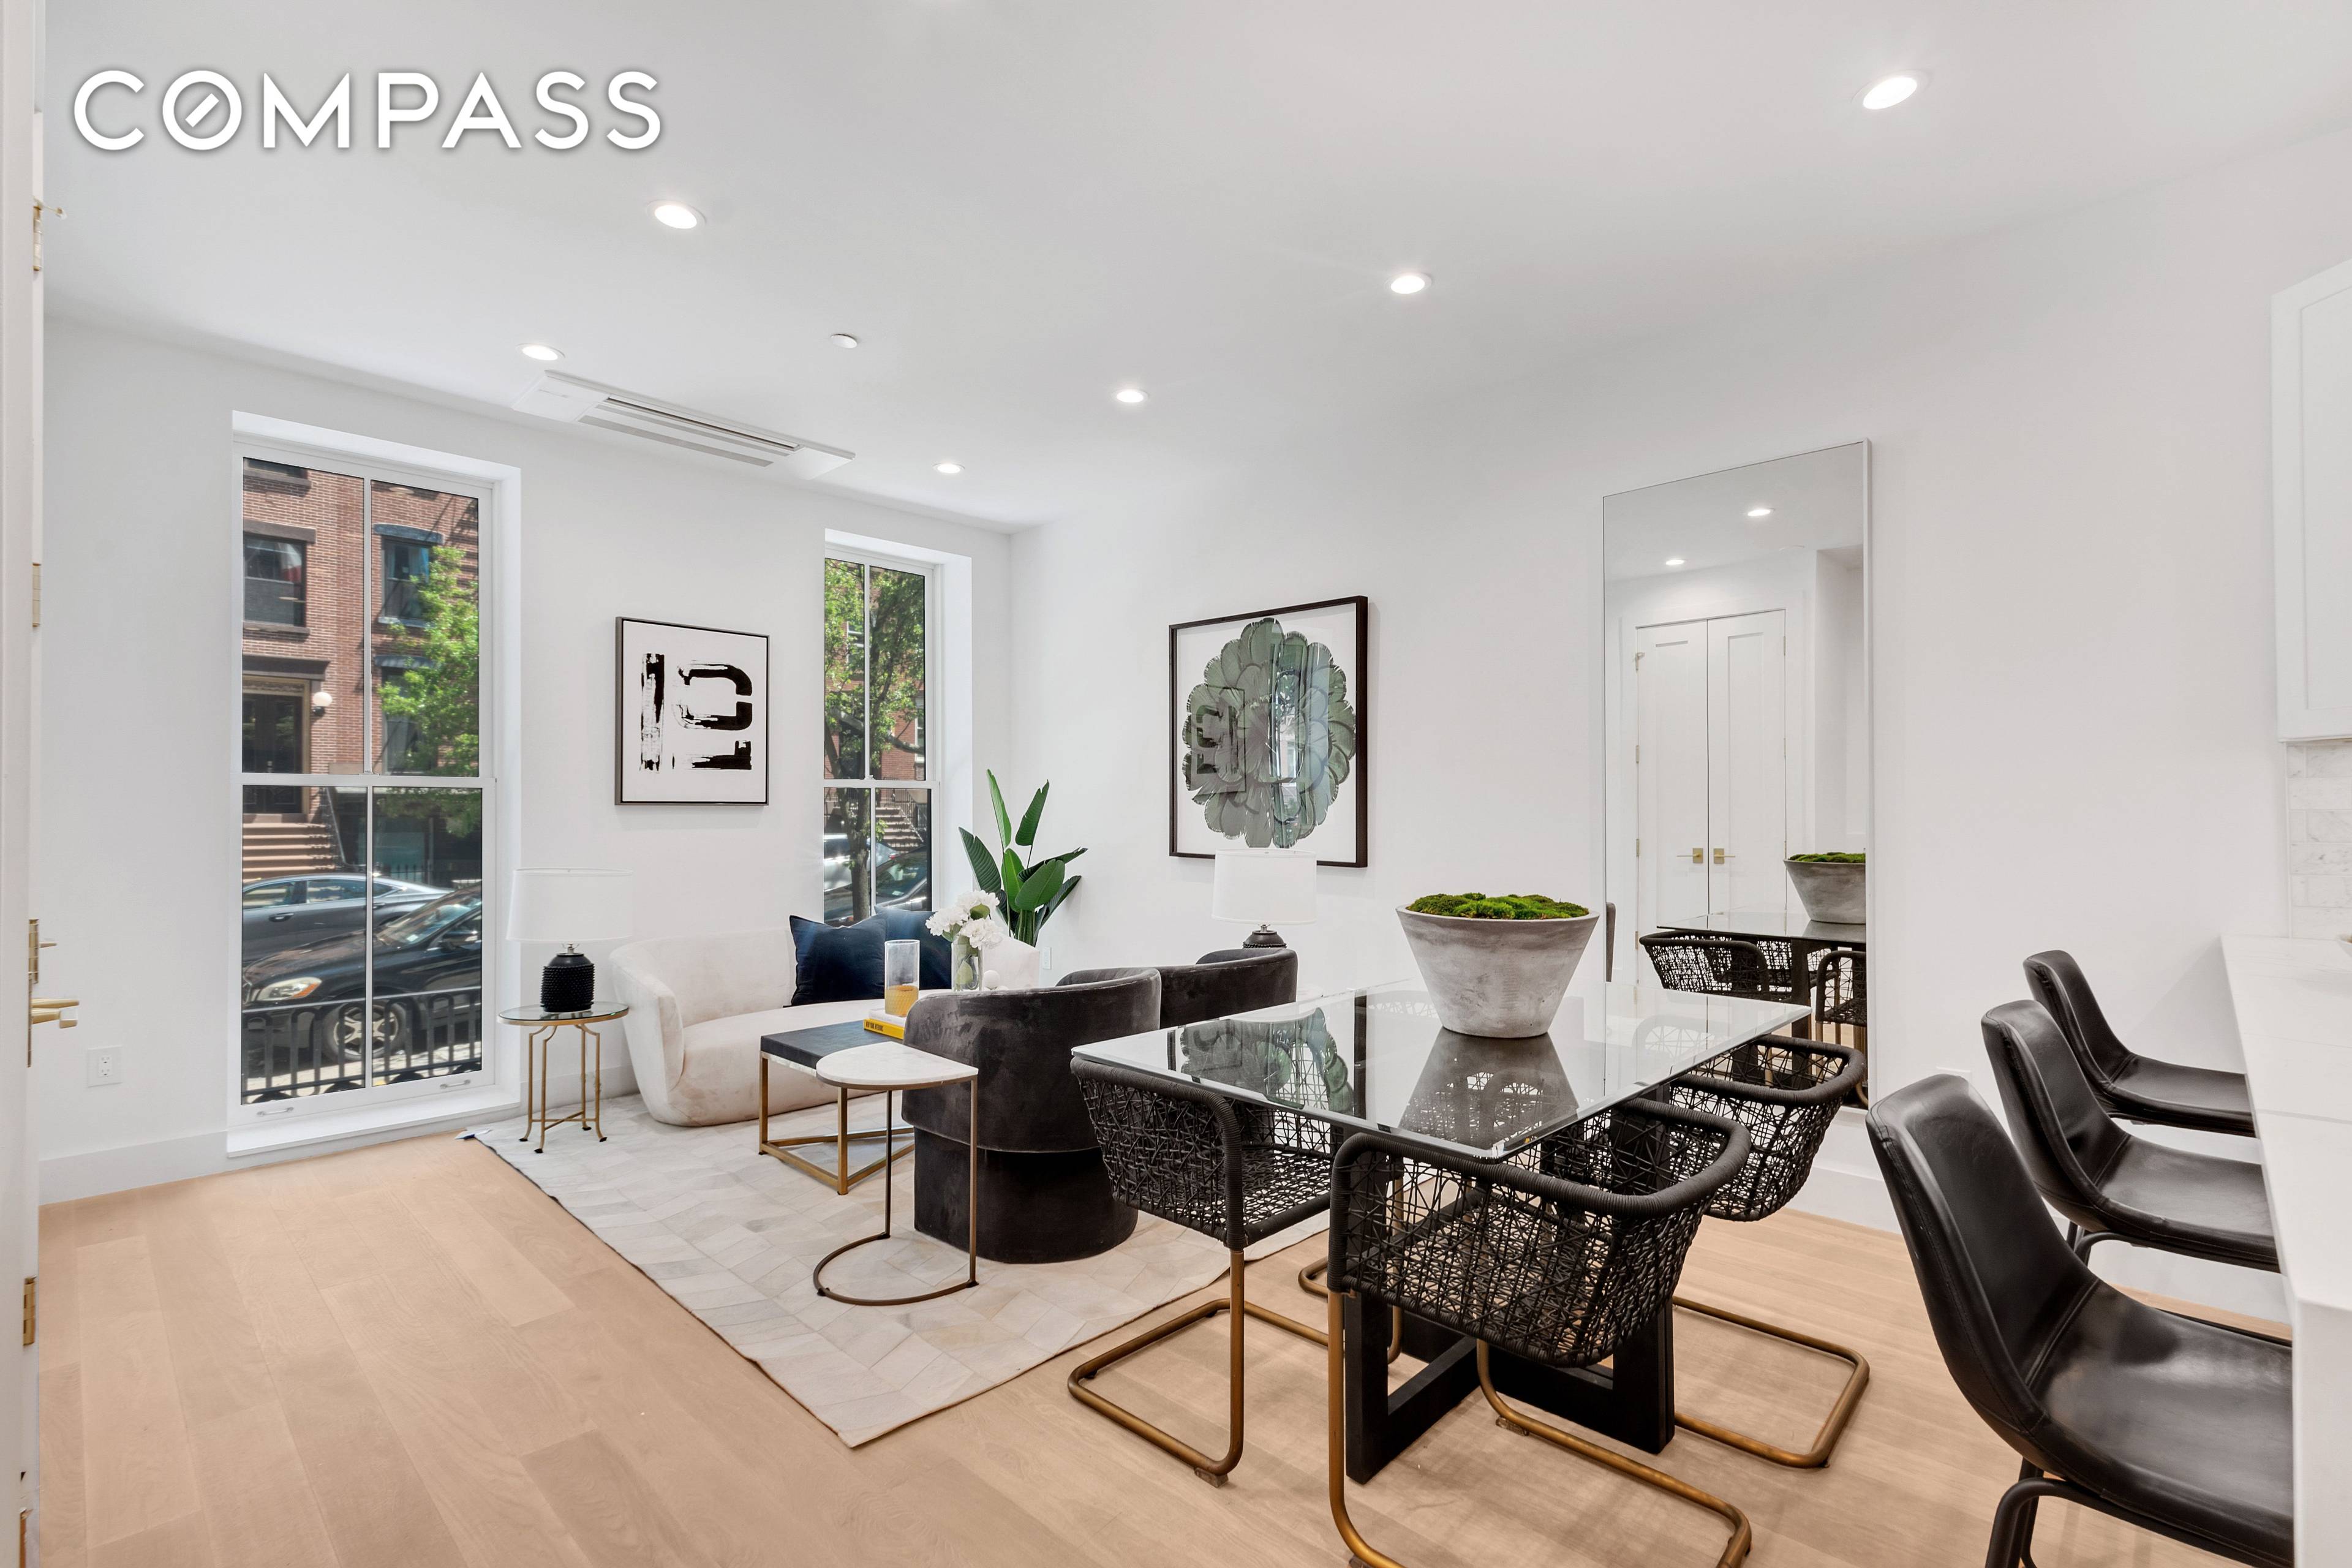 Introducing 102 Summit Street Parlor Duplex The ultimate Best of Modern Brooklyn Living is this Newly Constructed Condo Enter to an open Concept Floor plan that combines Modern, Classic understated ...